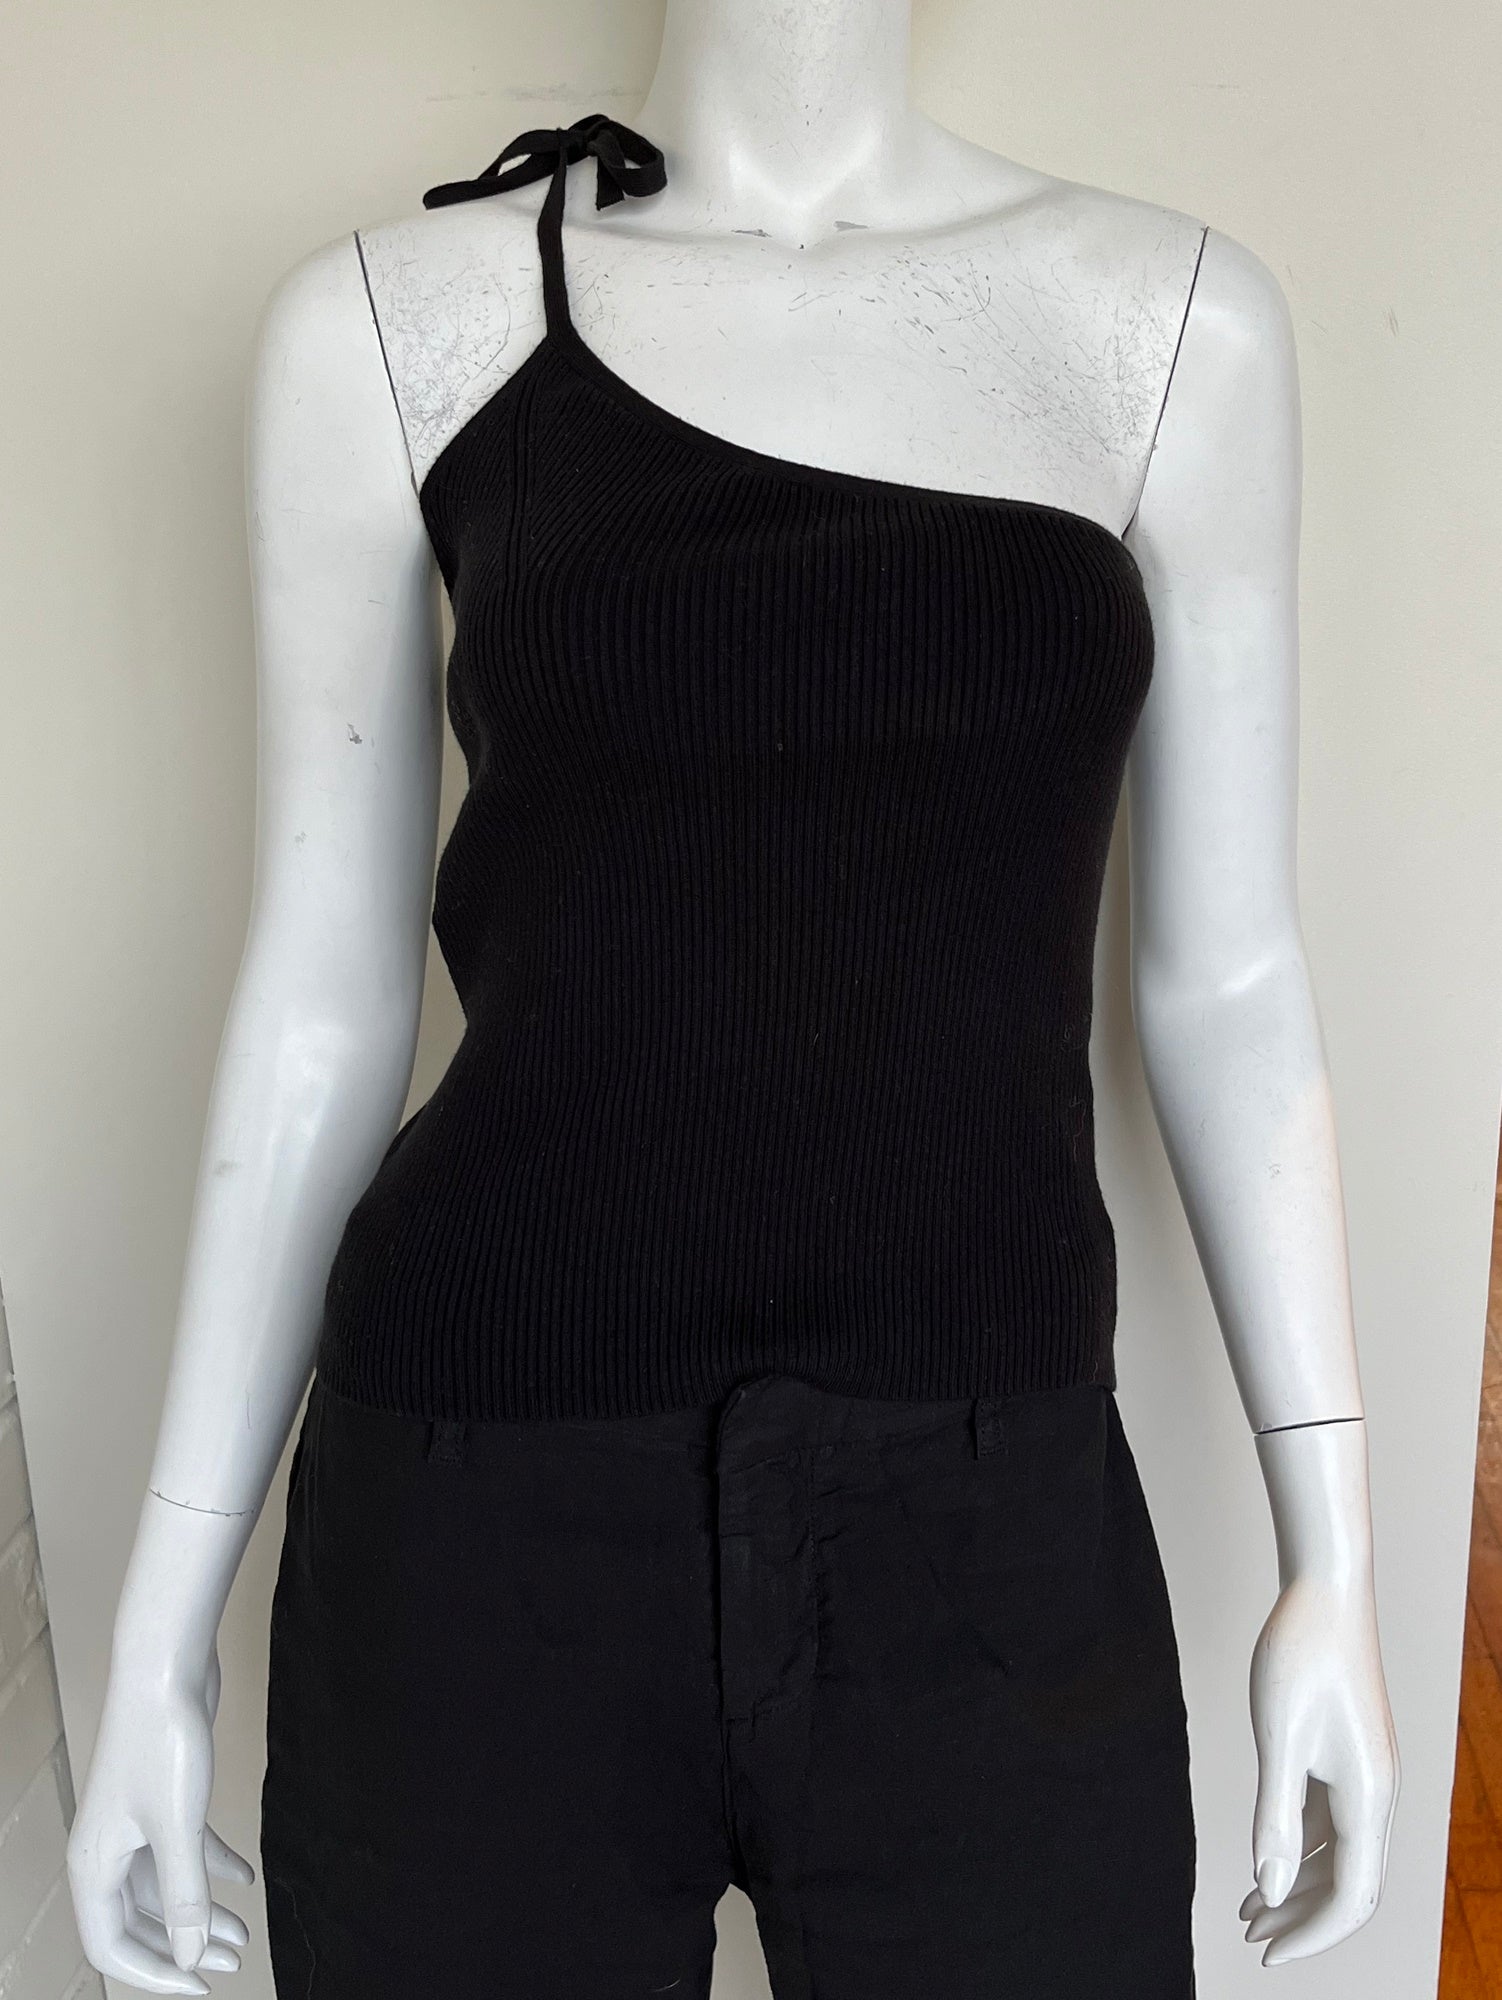 Top South One Shoulder Top Size 0 NWT